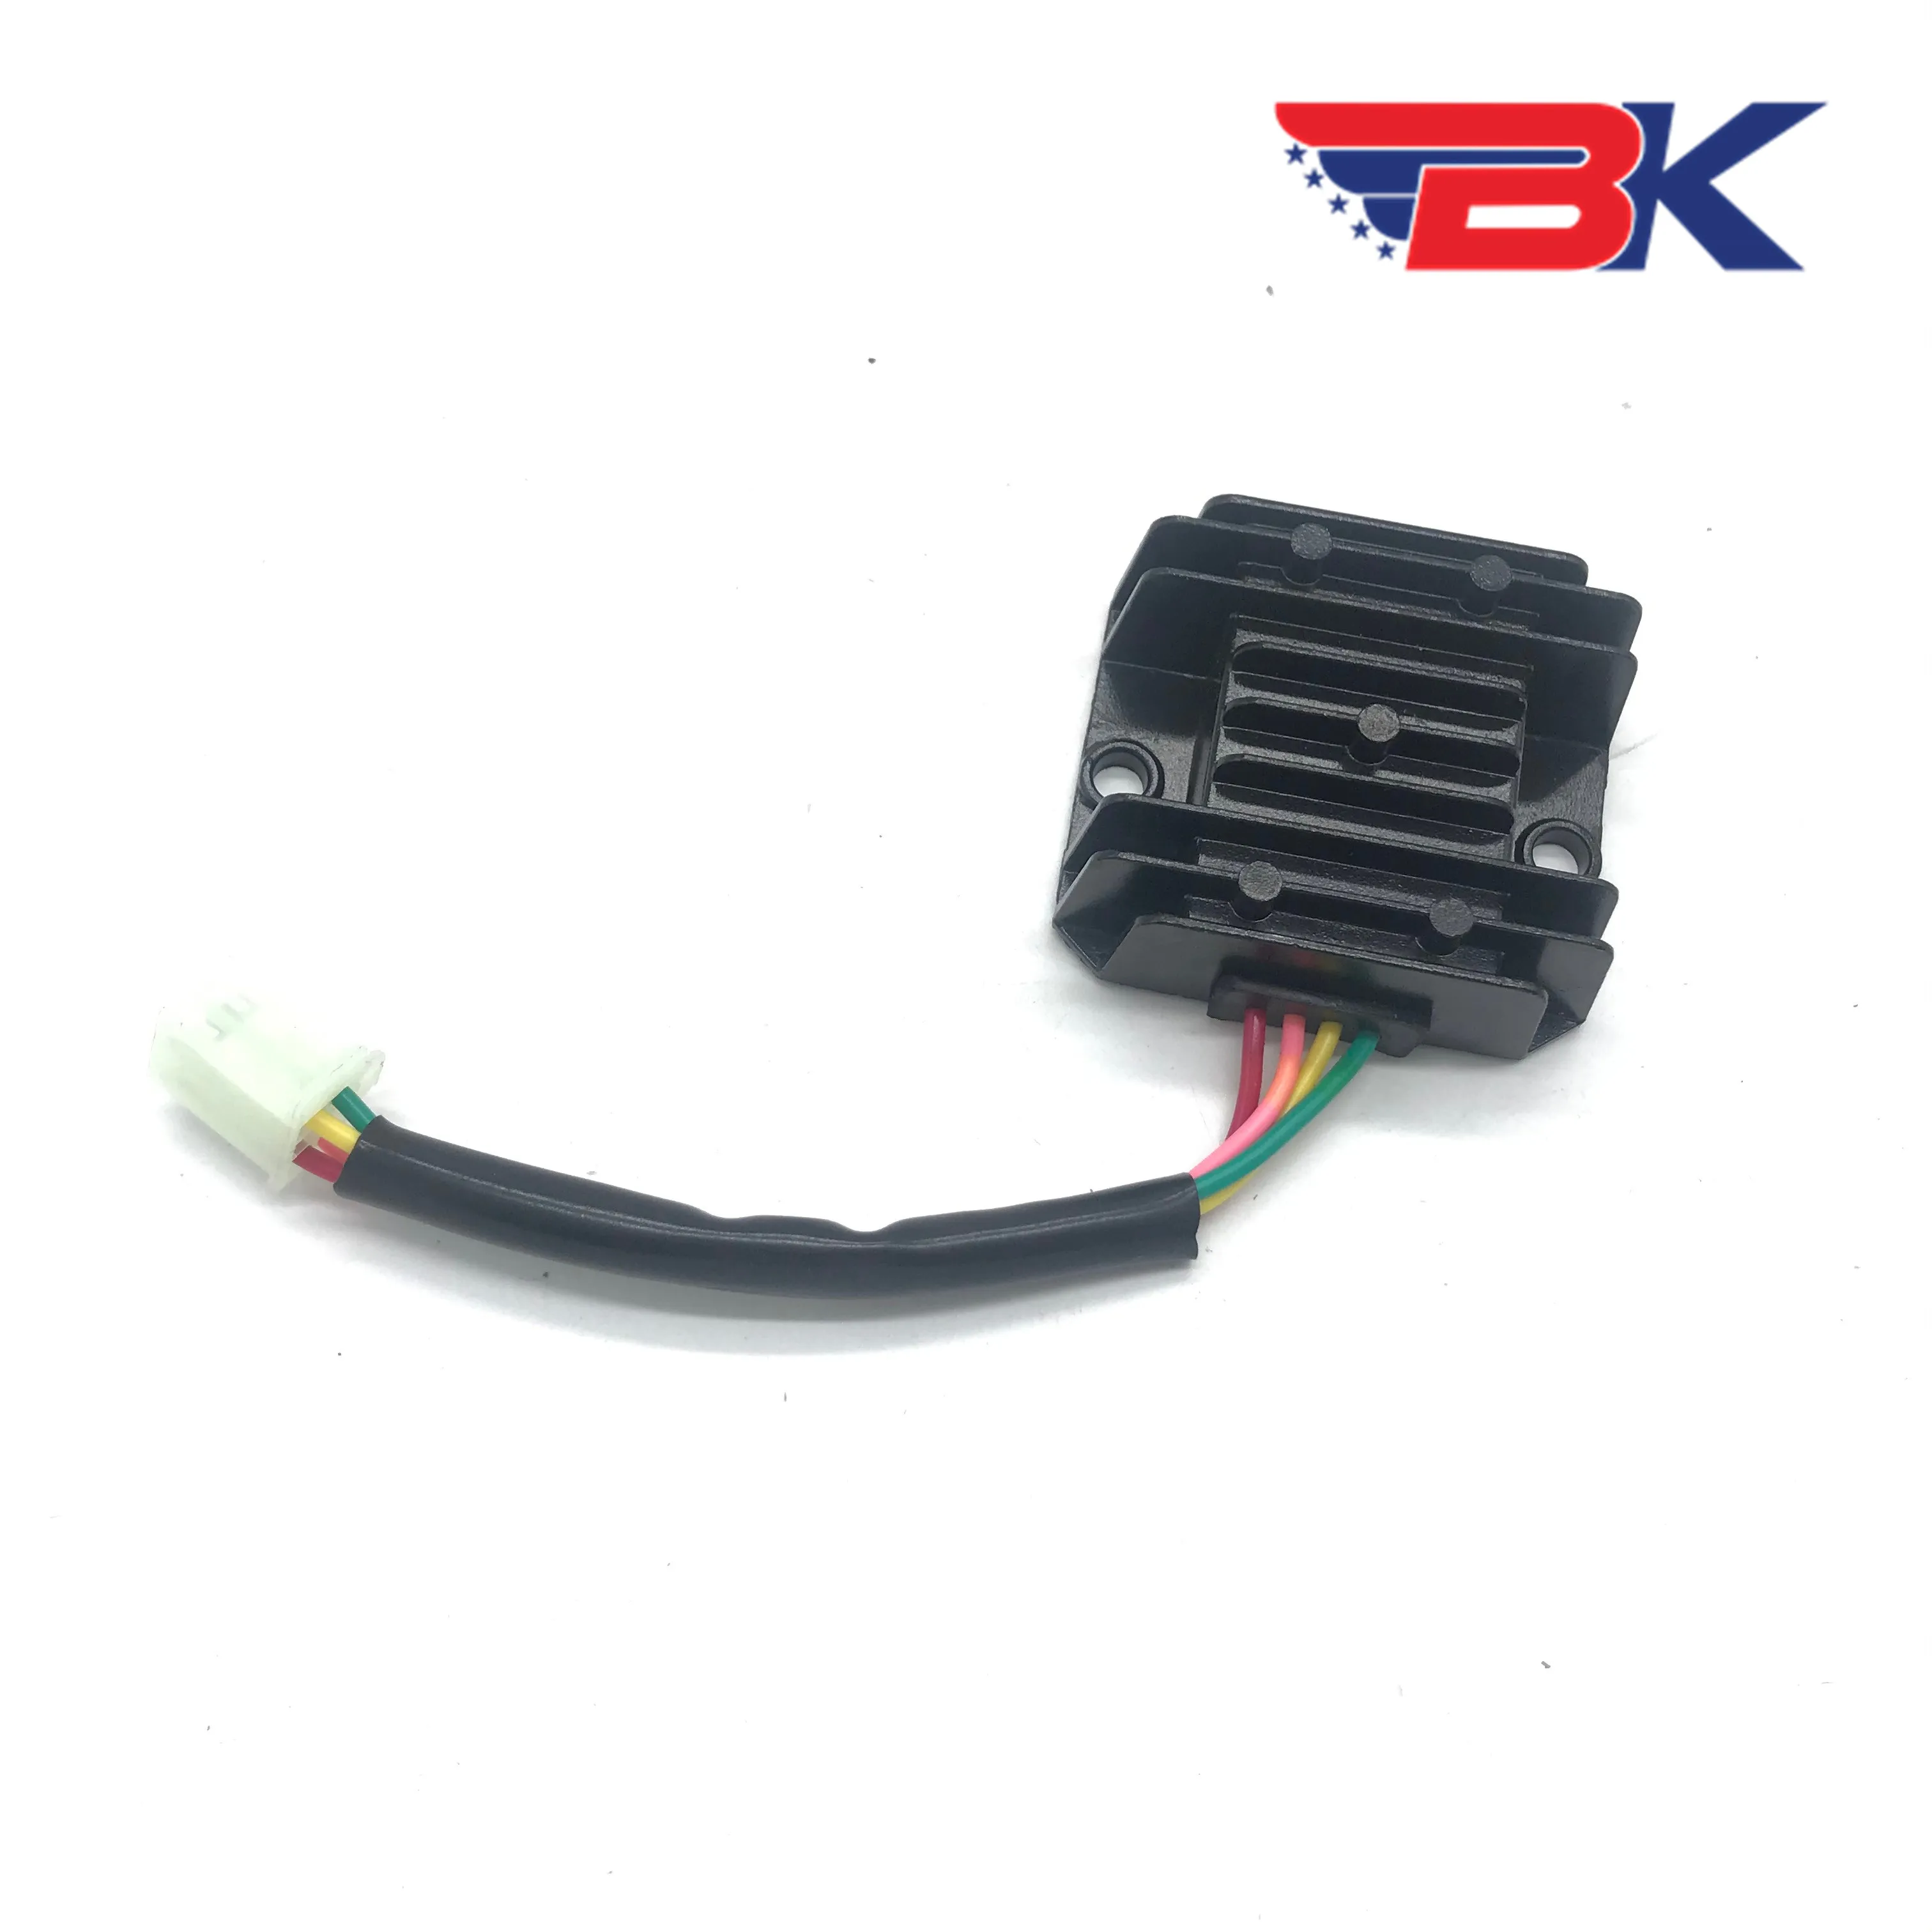 

4 Wires 12 Voltage Regulator Rectifier Motorcycle Boat Motor Mercury ATV GY6 50 150cc Scooter Moped JCL NST TAOTAO